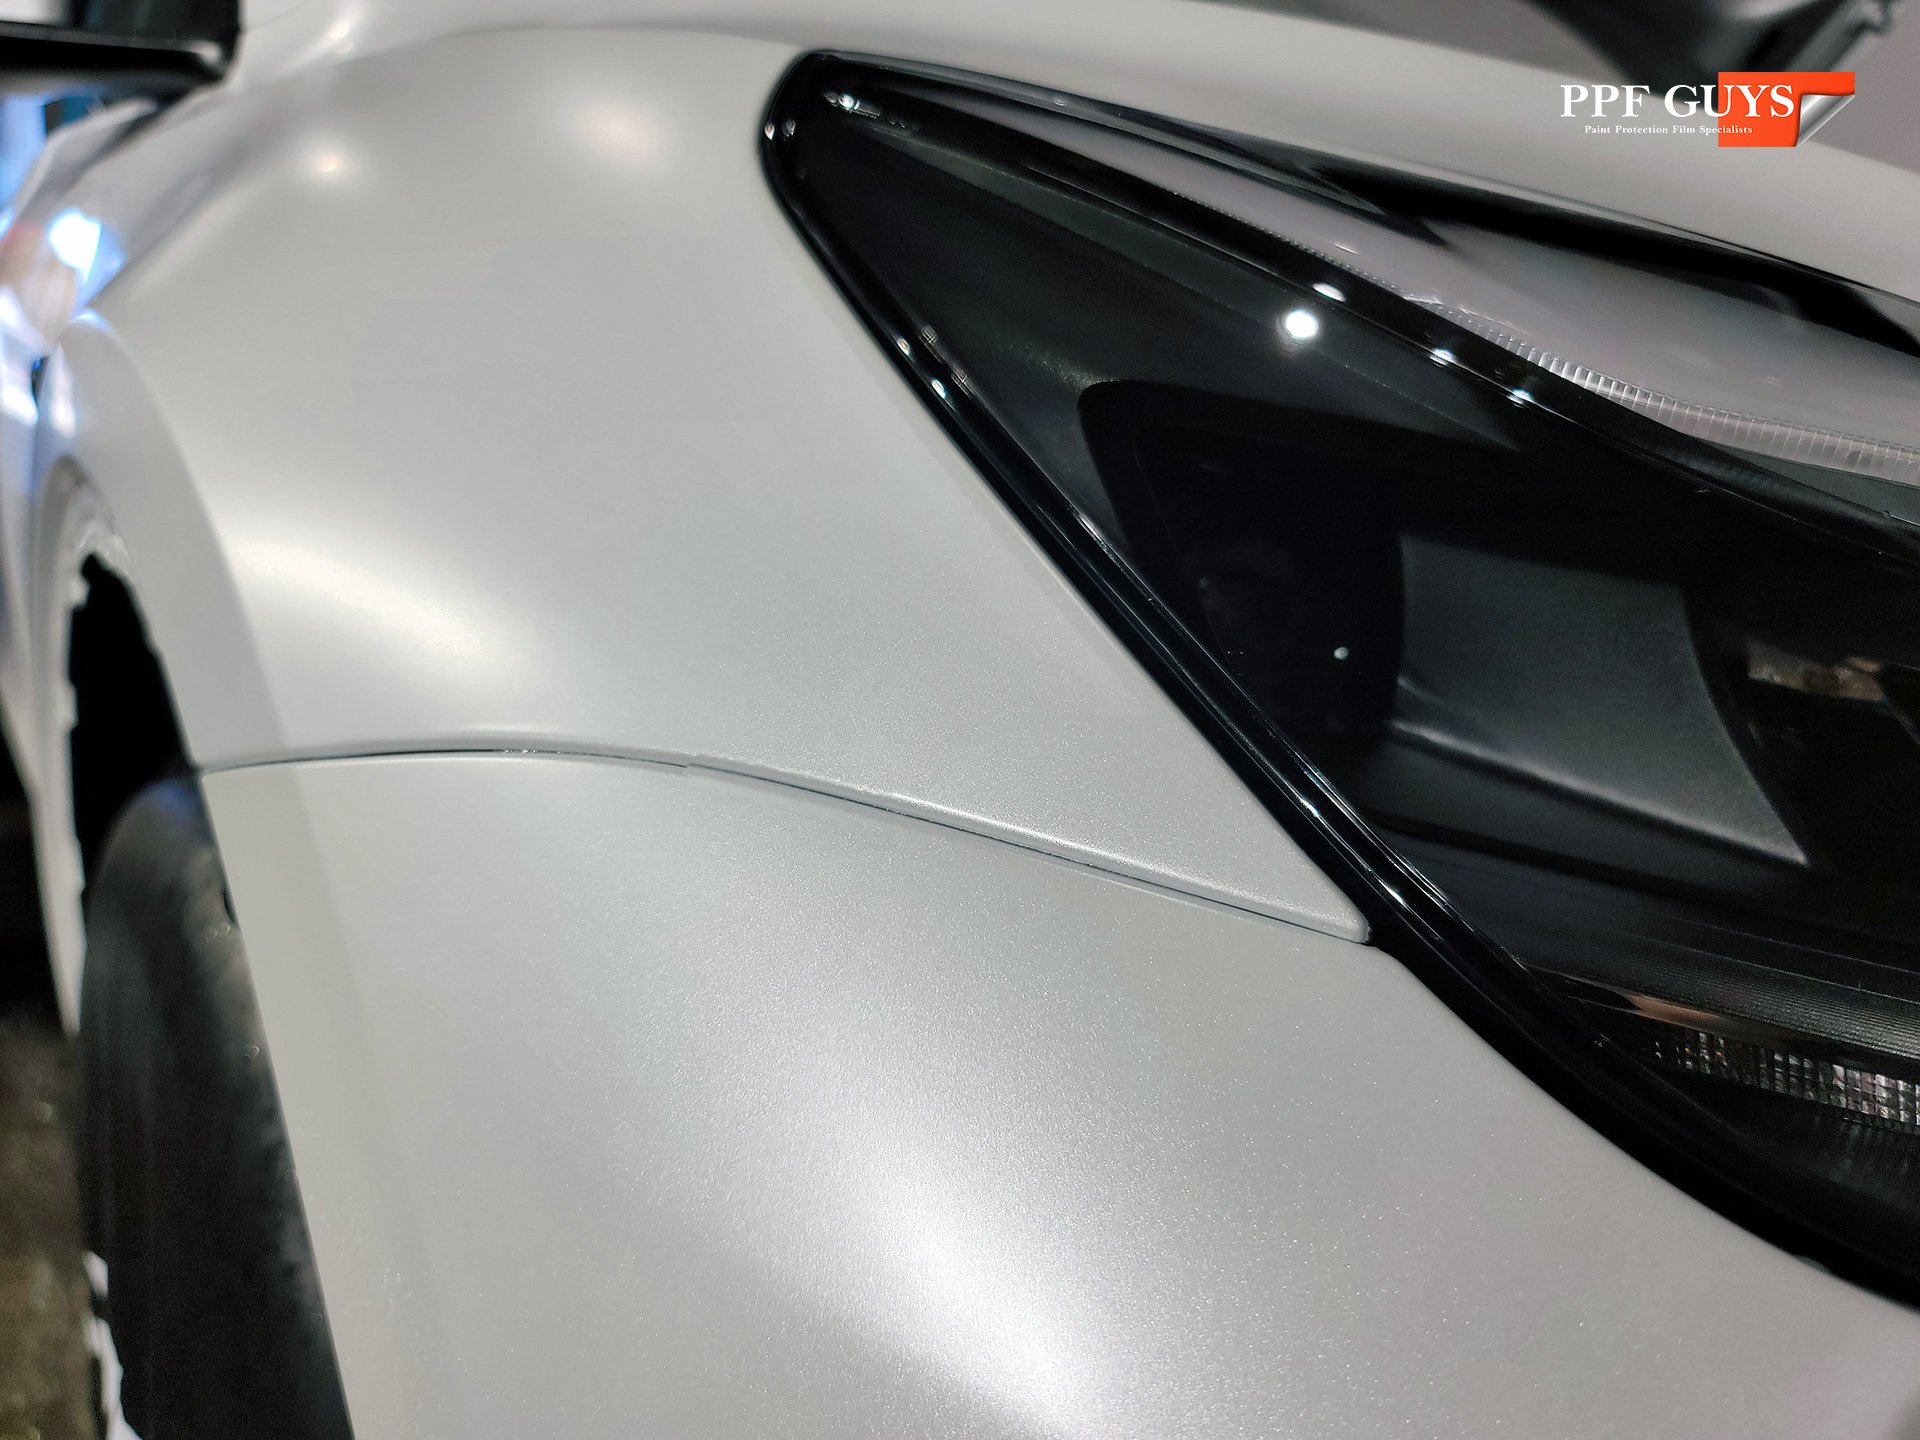 PPF Guys Model Y White Xpel Stealth, ceramic, painted emblems (13).jpg